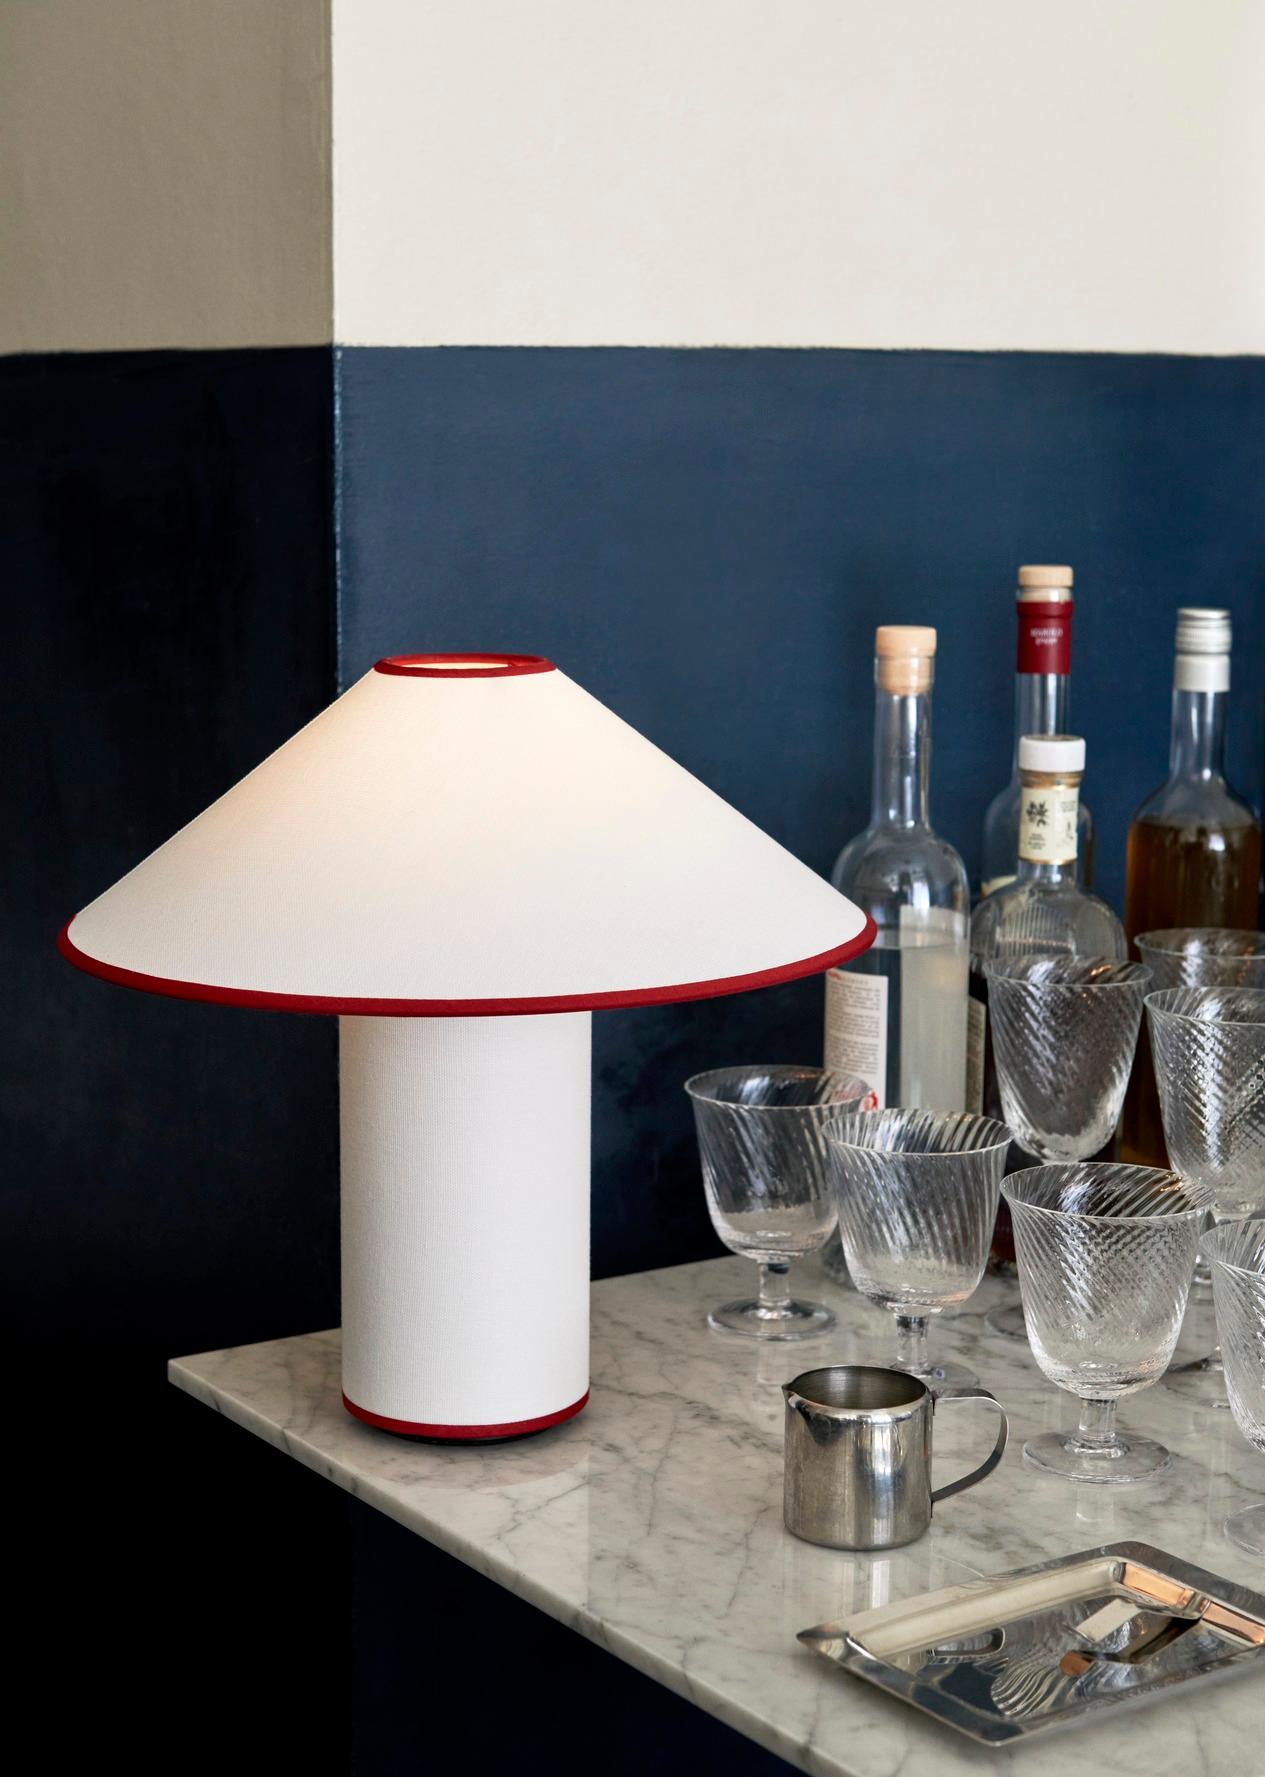 Named after the famed and pioneering French author known simply as ‘Colette’, &Tradition’s new table lamp has an avant-garde aesthetic. Showcasing a tactile shade and base fully encased in a crisp, off-white cotton-linen blend, this dimmable lamp is